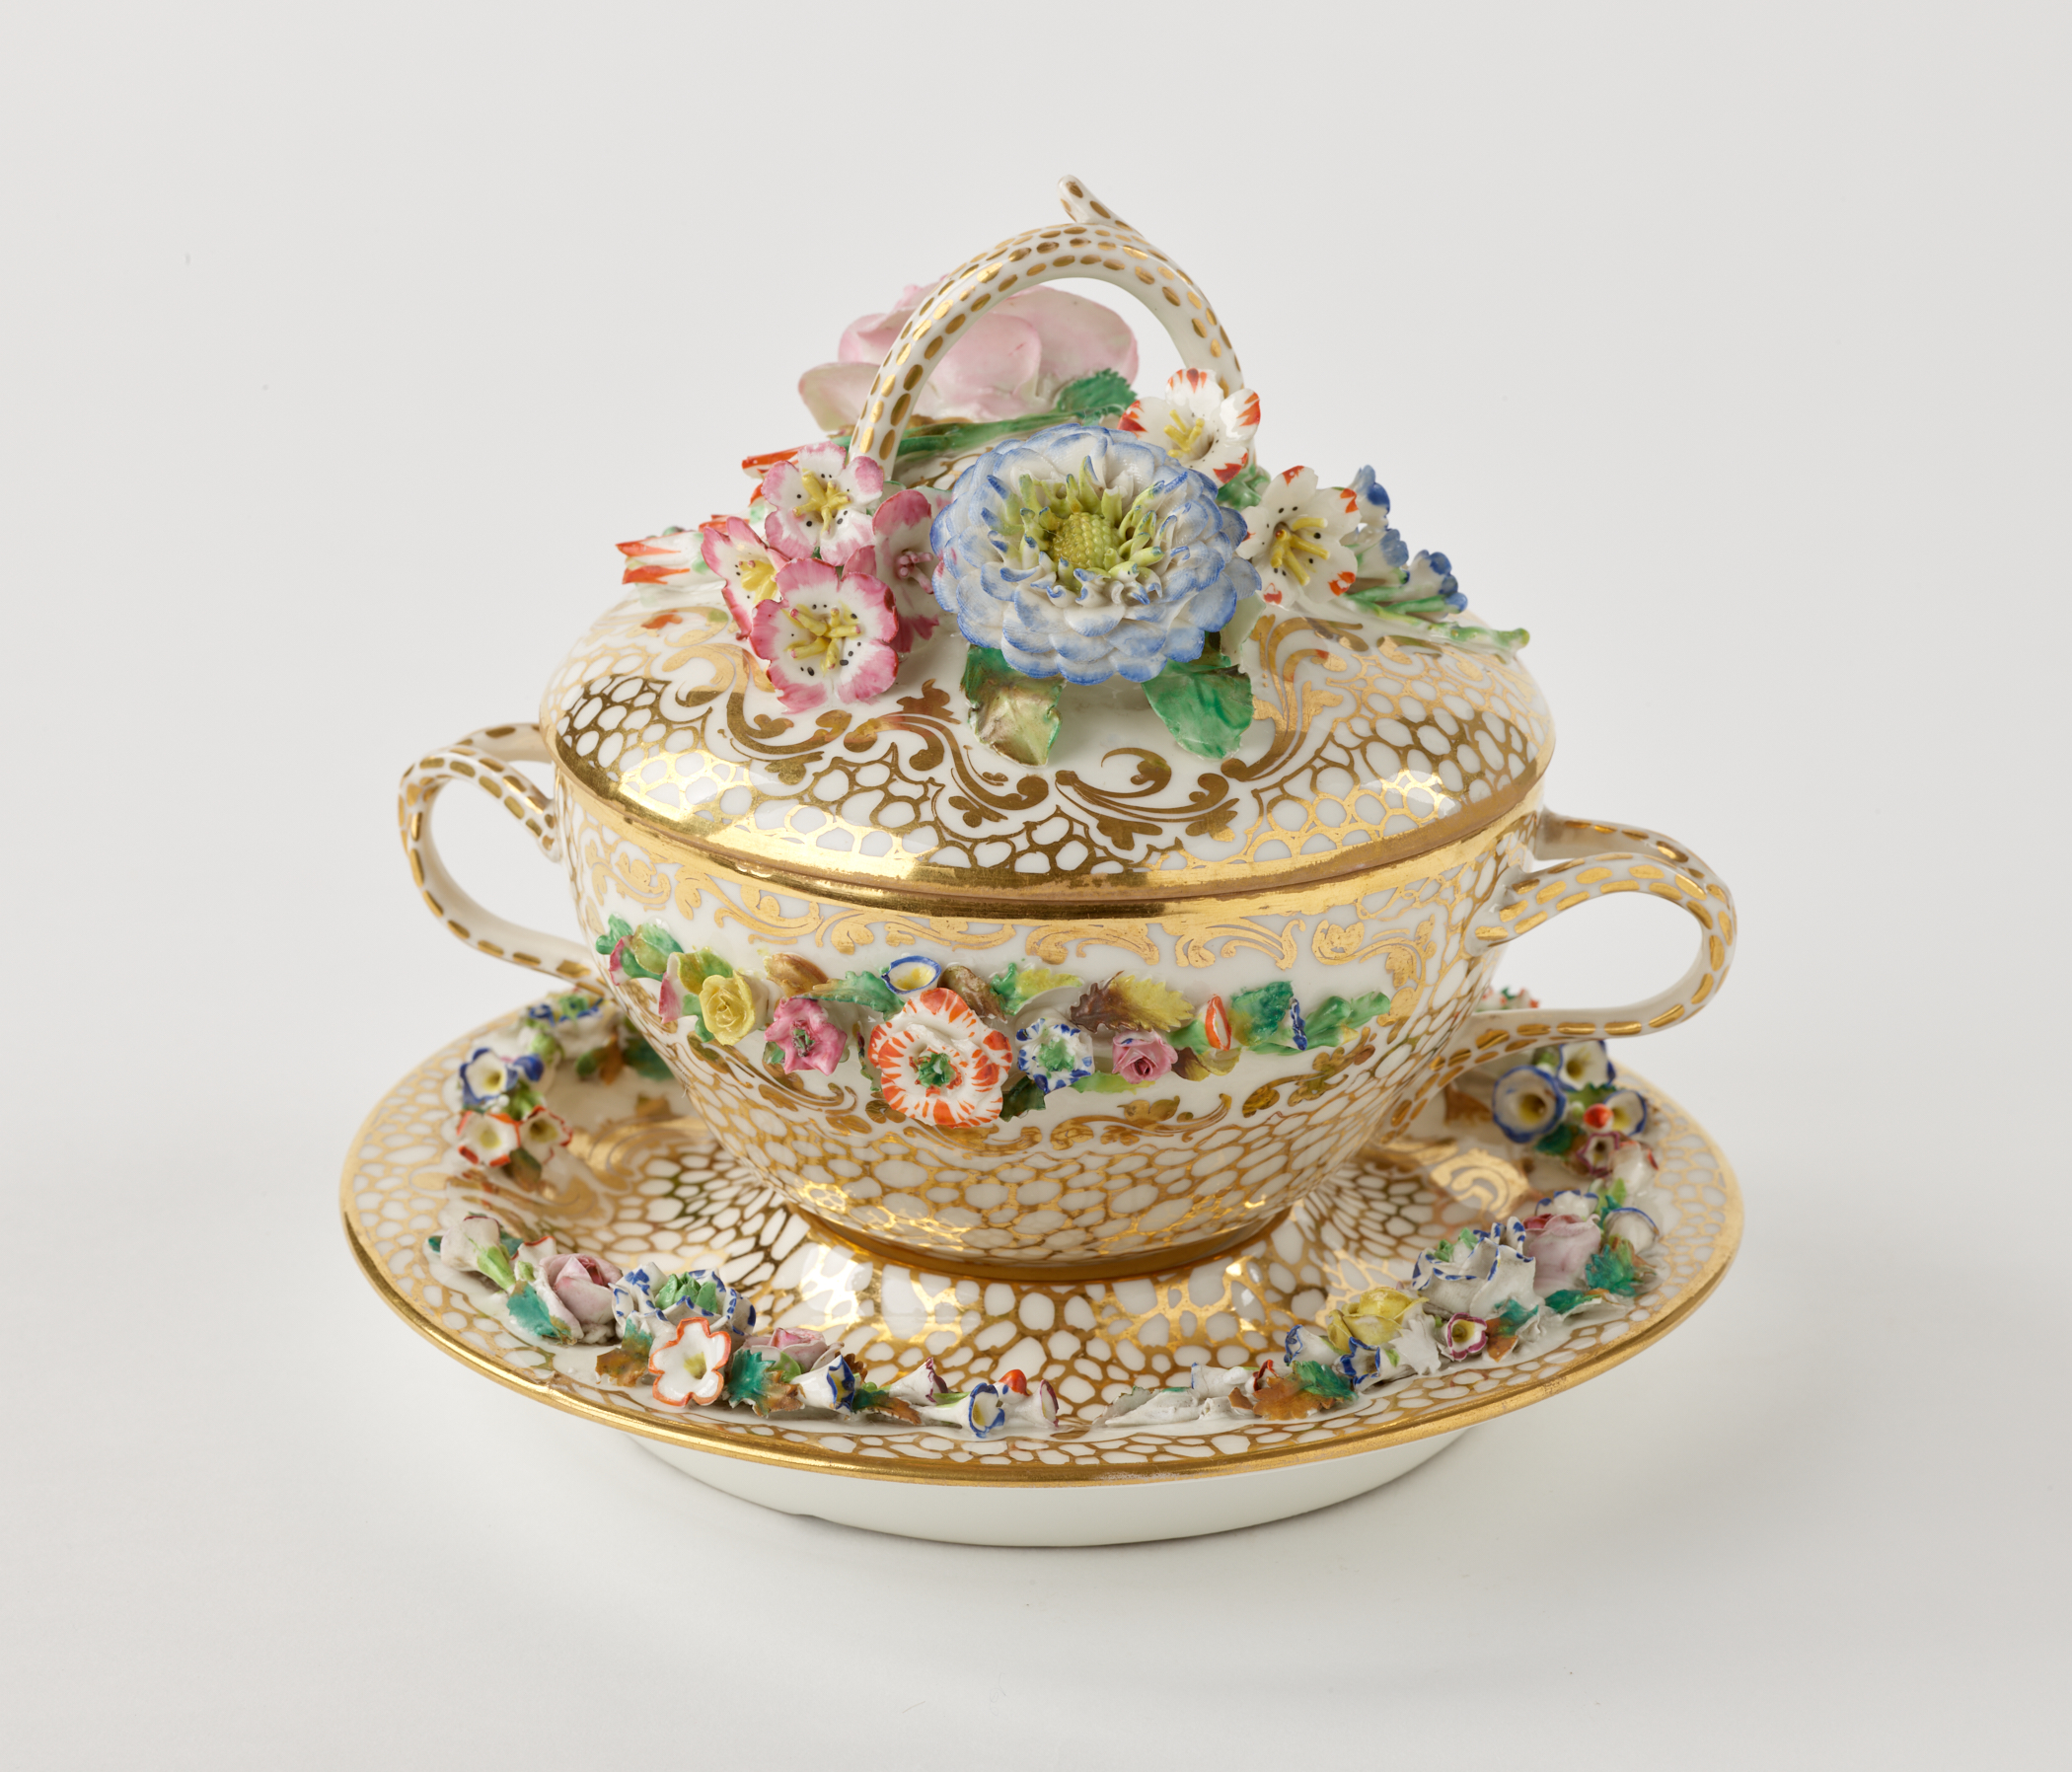 /A%20porcelain%20two%20handled%20covered%20bowl%20and%20fitted%20saucer.%20The%20decorations%20are%20gold%2C%20pink%2C%20green%20and%20are%20floral.%20